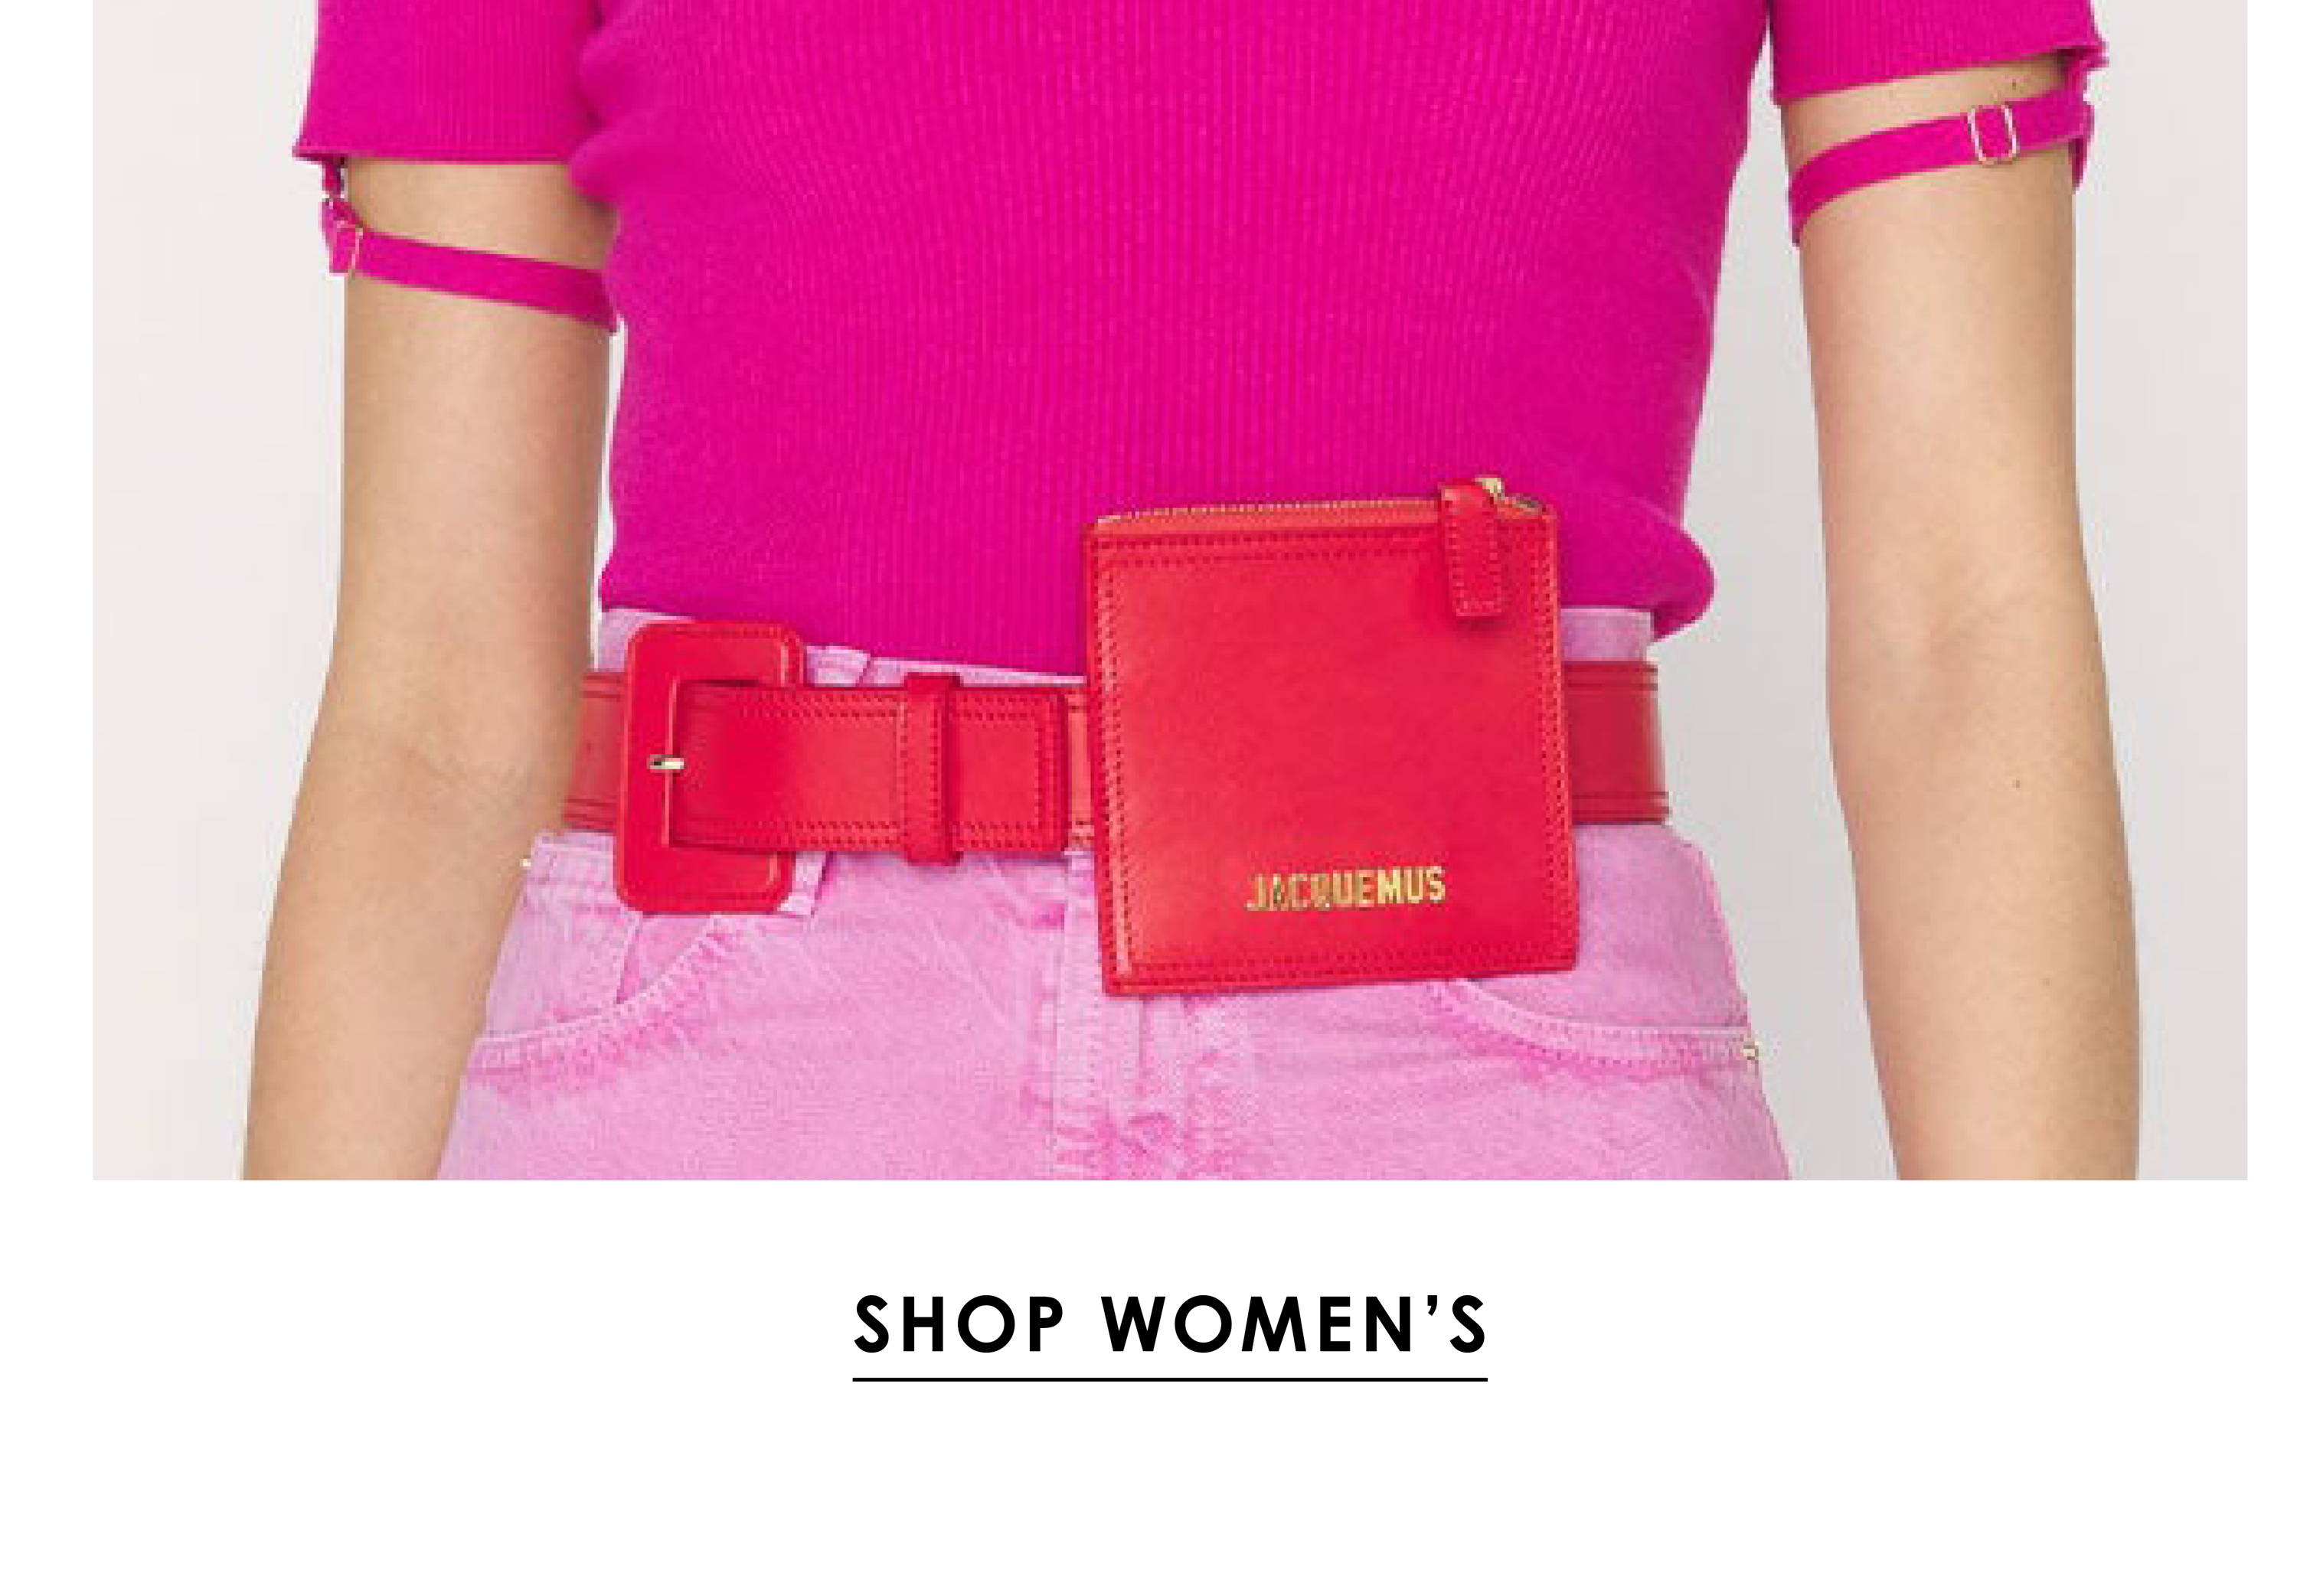 Shop women's shades of pink & red